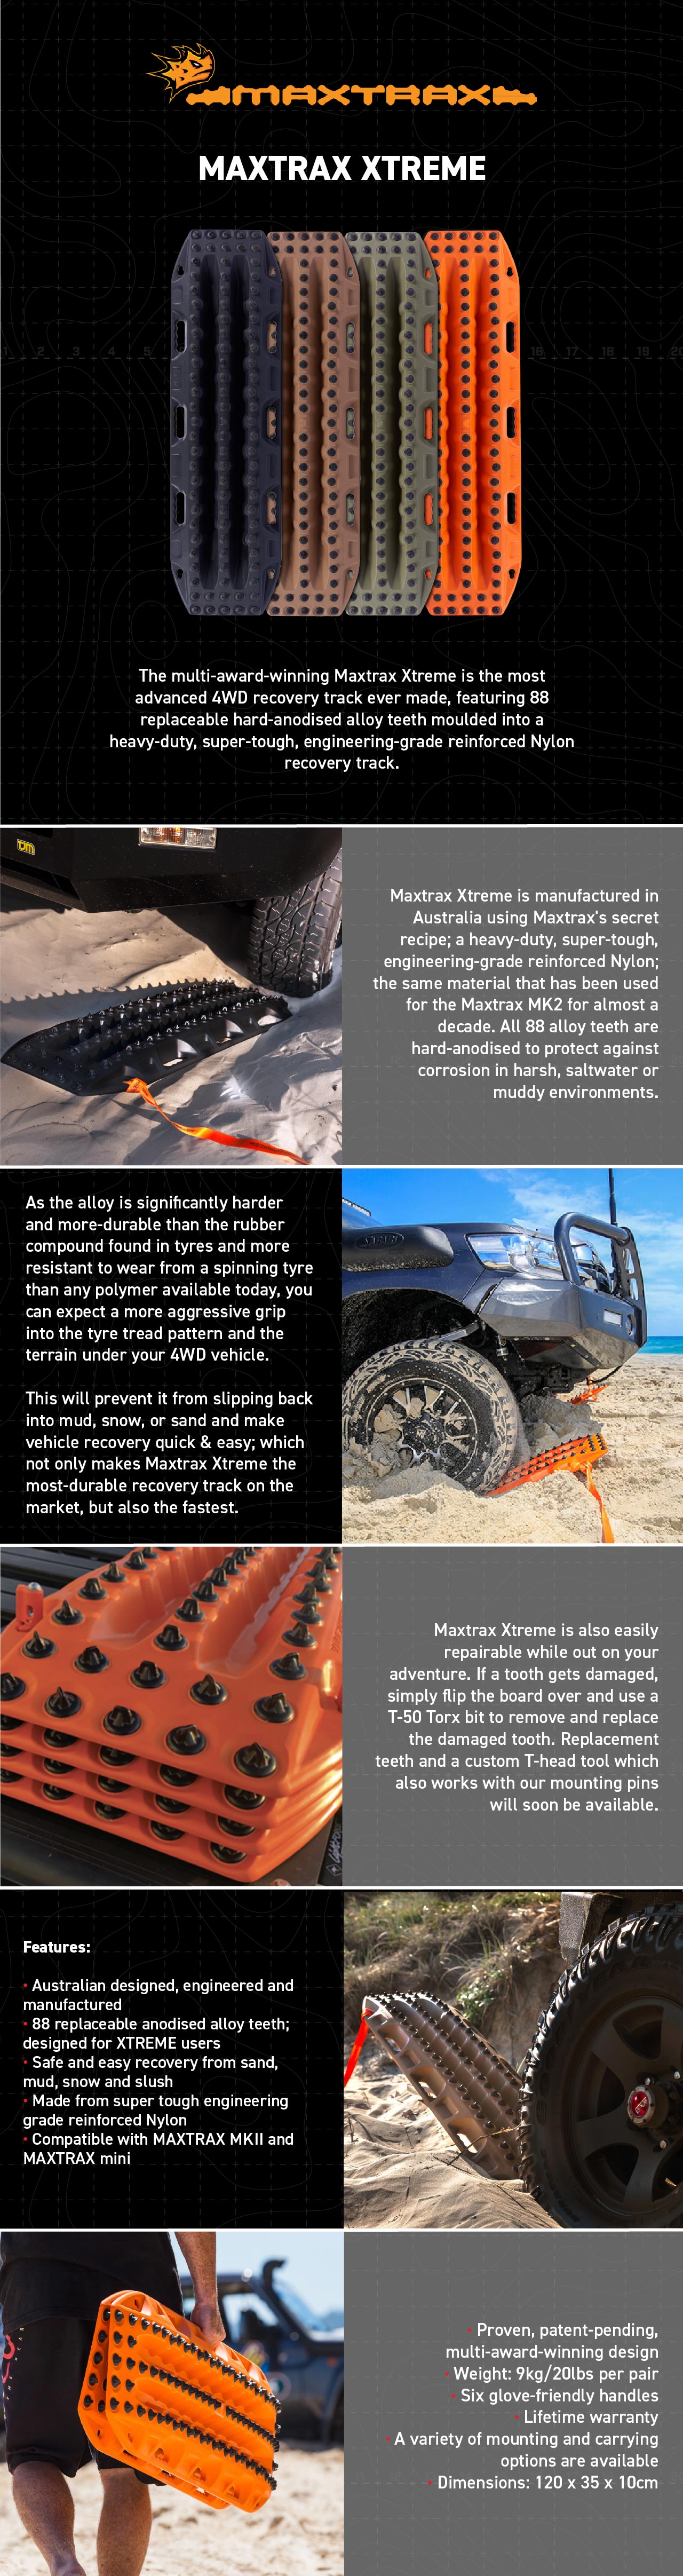 The multi-award-winning Maxtrax Xtreme is the most advanced 4WD recovery track ever made, featuring 88 replaceable hard-anodised alloy teeth moulded into a heavy-duty, super-tough, engineering-grade reinforced Nylon recovery track. `